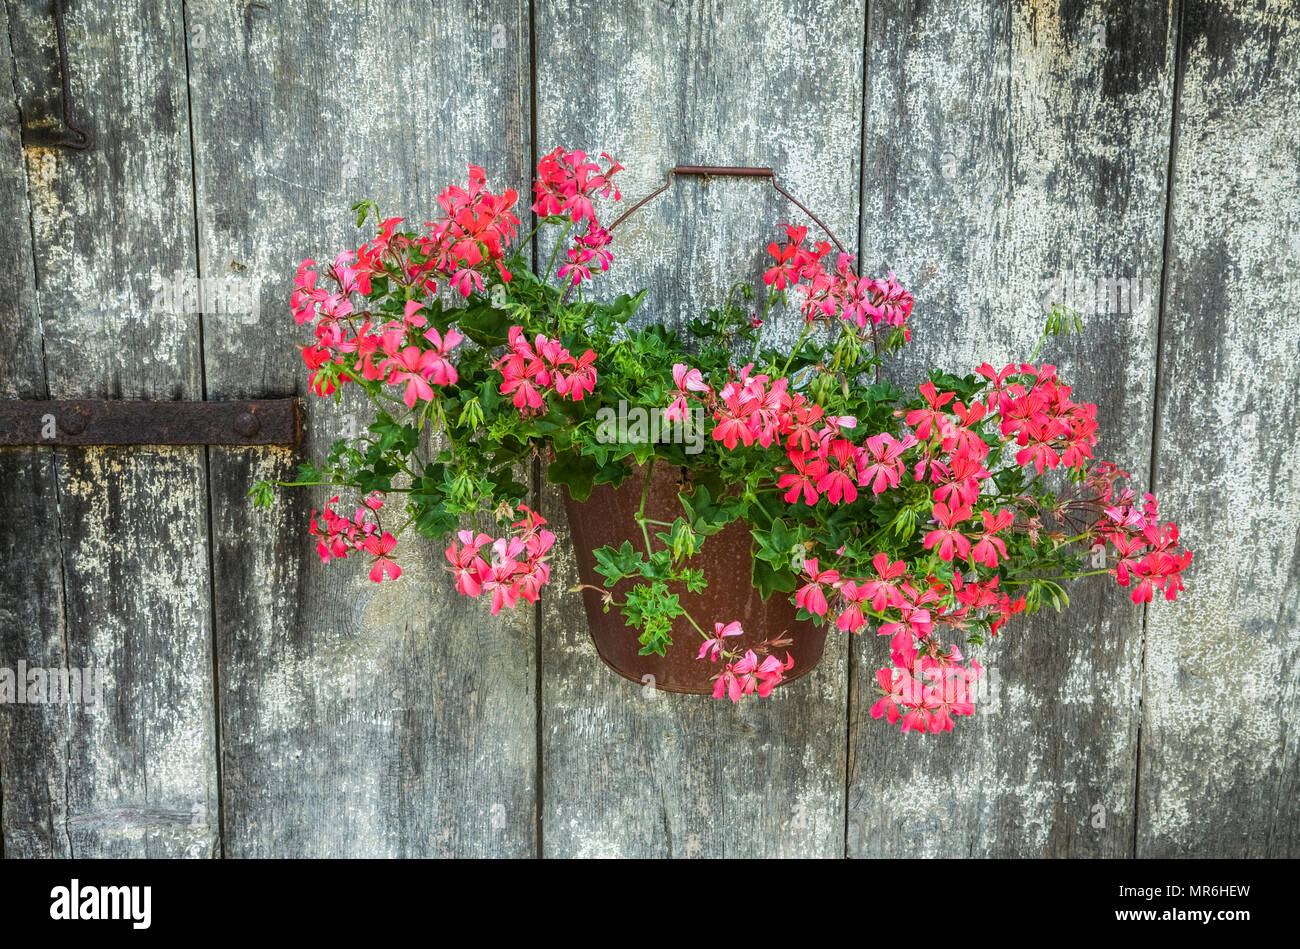 Pink Ivy Geranium spring planter hanging on a weathered barn door, wall  Pennsylvania, Pa, USA, spring container vintage hanging plants Stock Photo